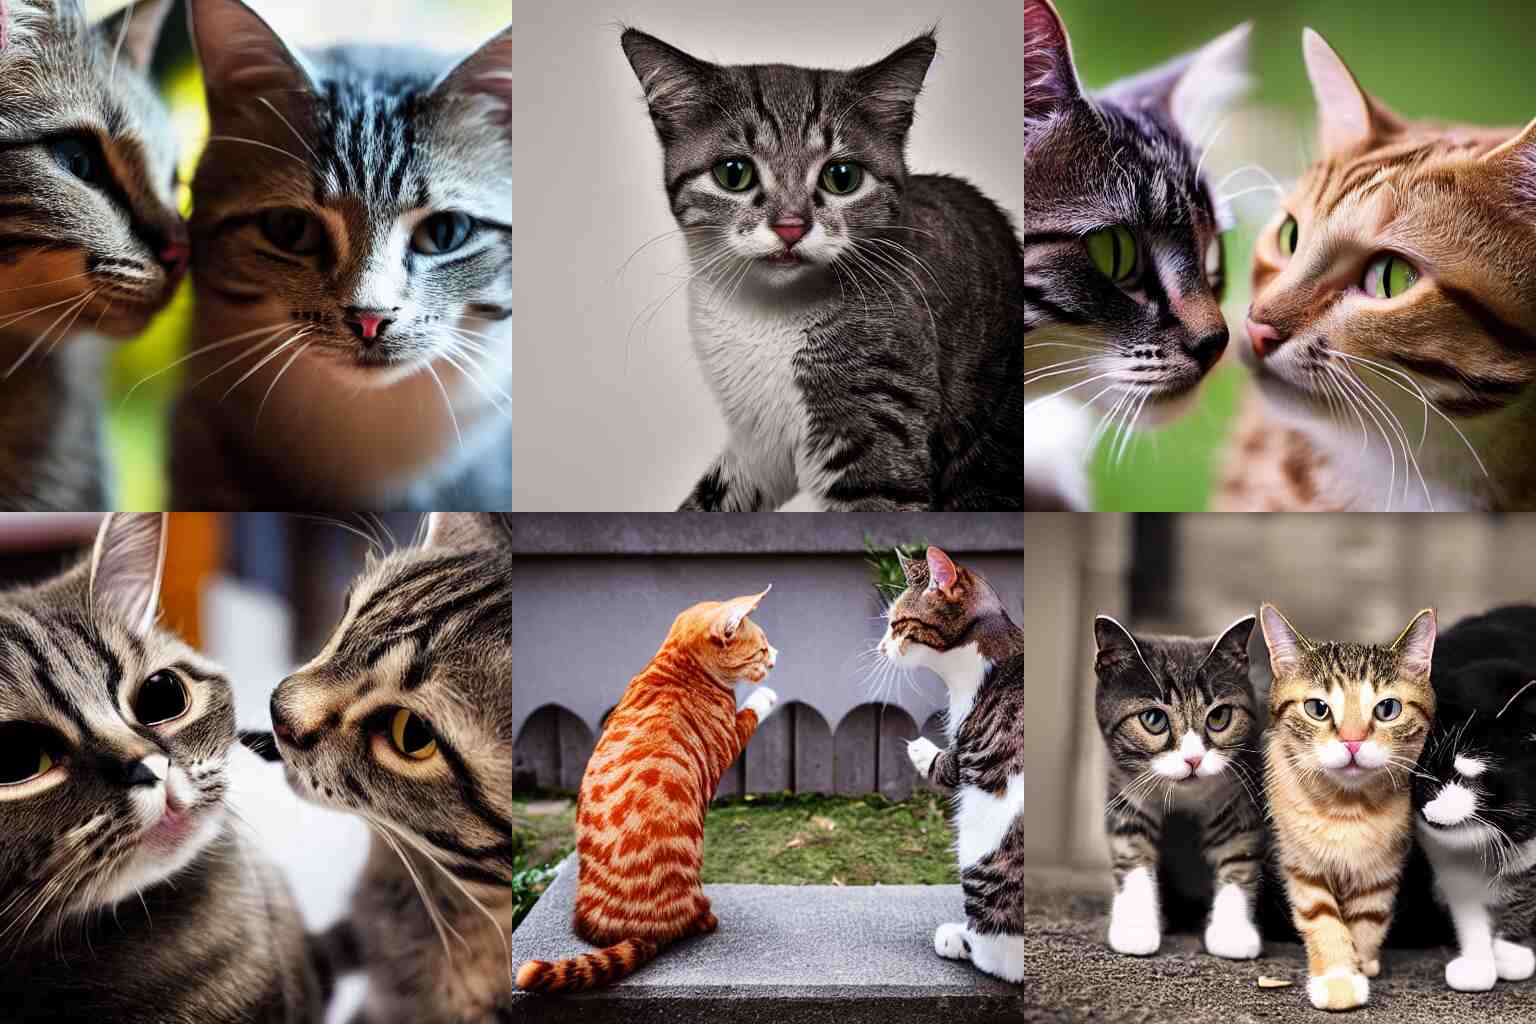 Best 3 APIs To Detect Cats In Images By Breed Quickly & Easily